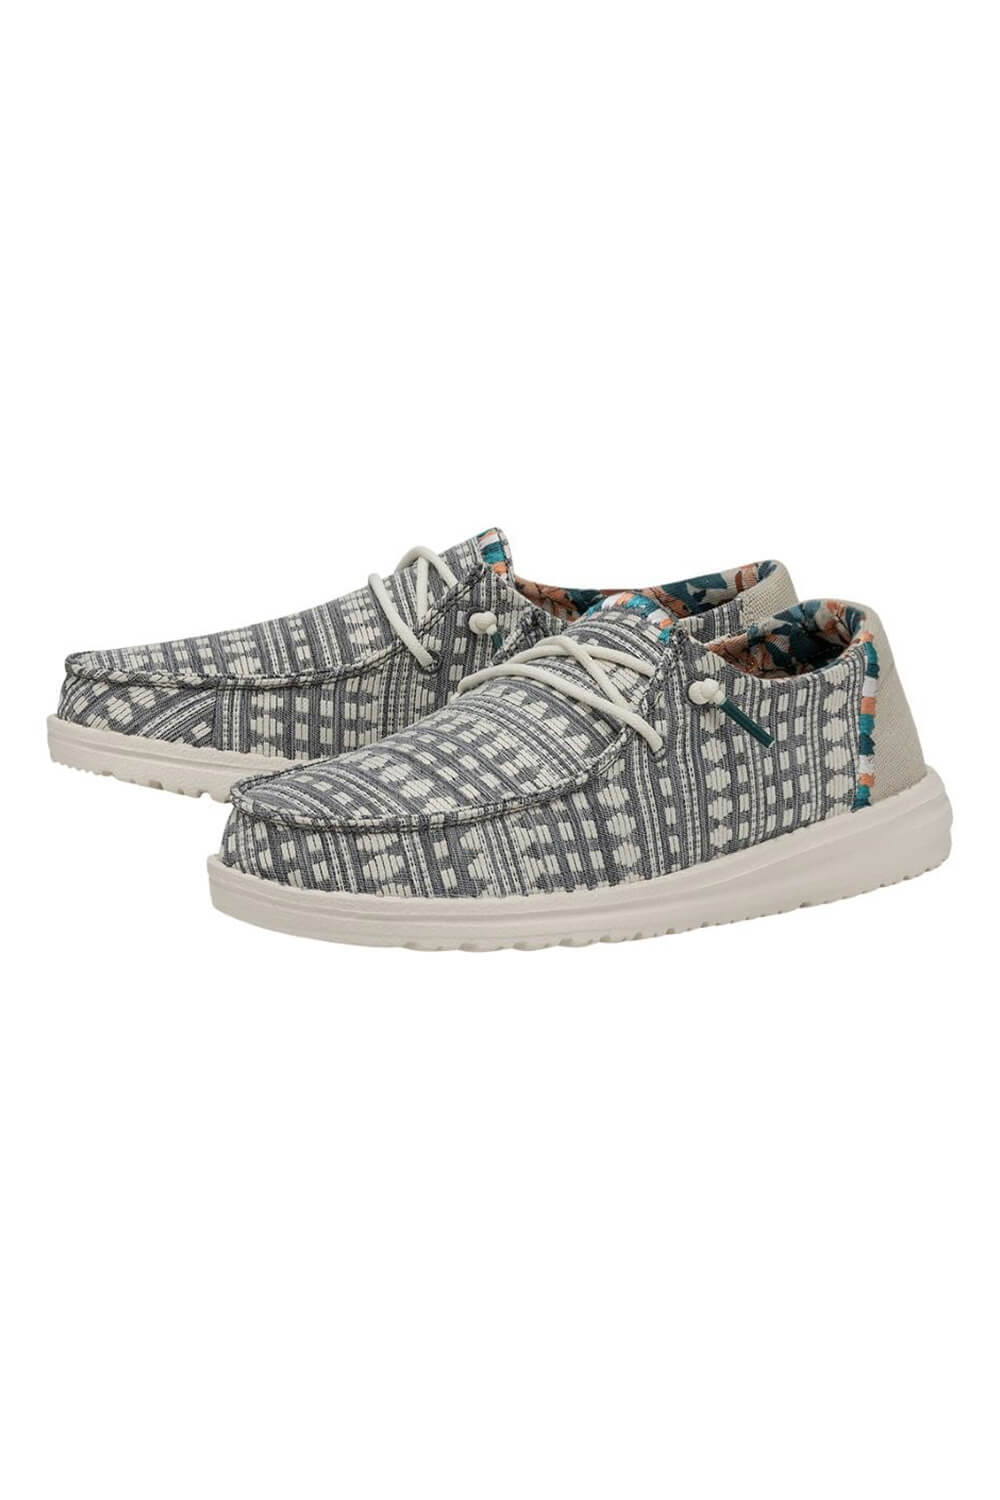 HEYDUDE Women's Wendy Boho Shoes in Embroidery Grey